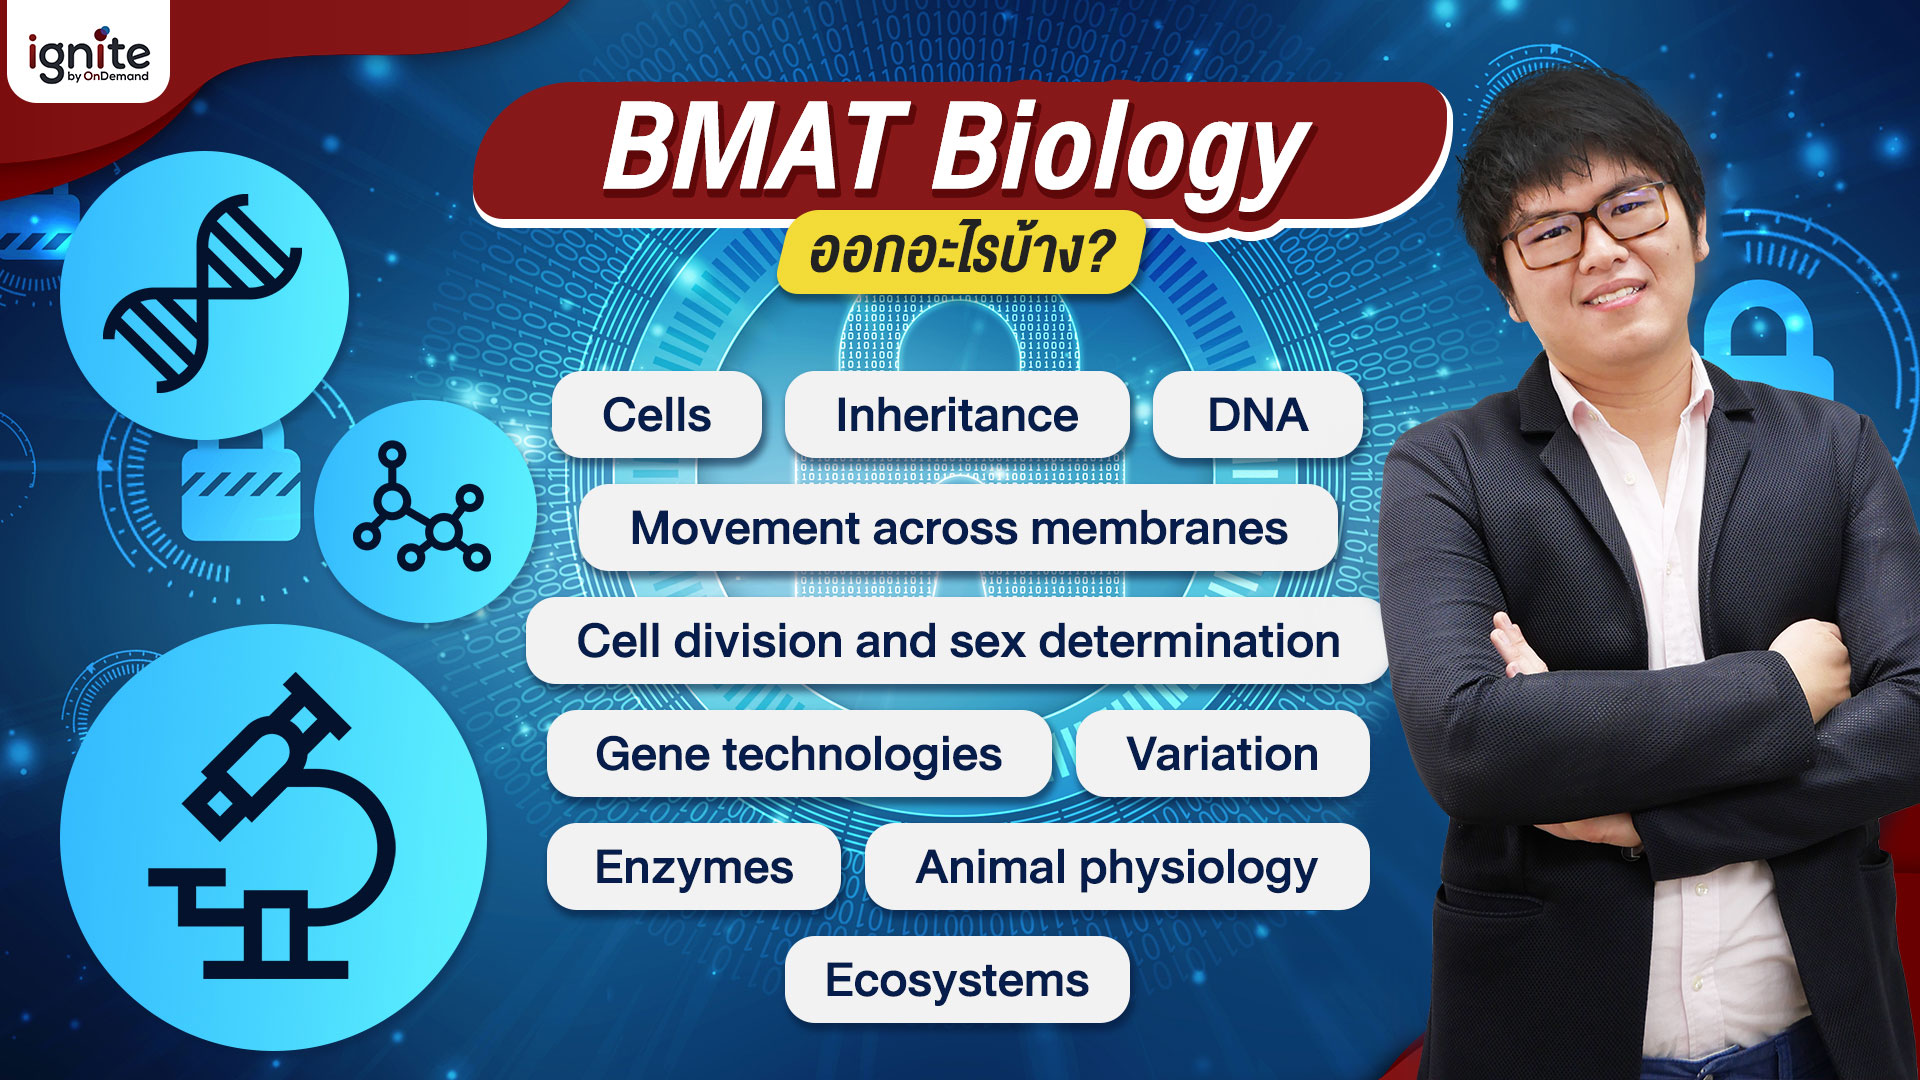 BMAT Biology Specification 2021 - ครูเคนจิ - ignite by OnDemand - Bigcover2